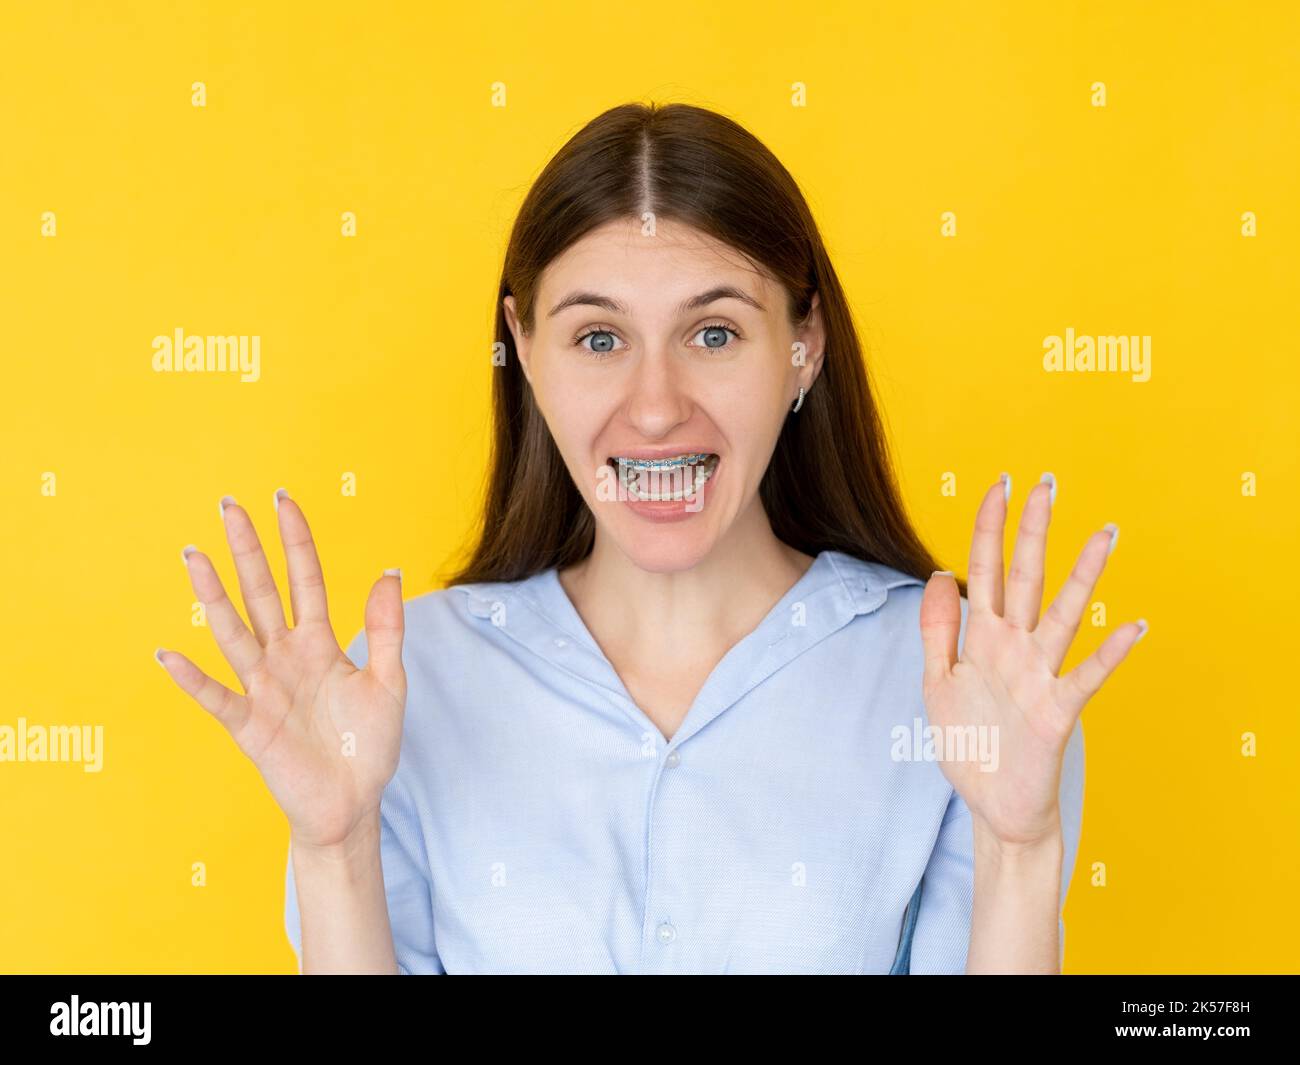 scary emotion gesturing woman frighten situation Stock Photo